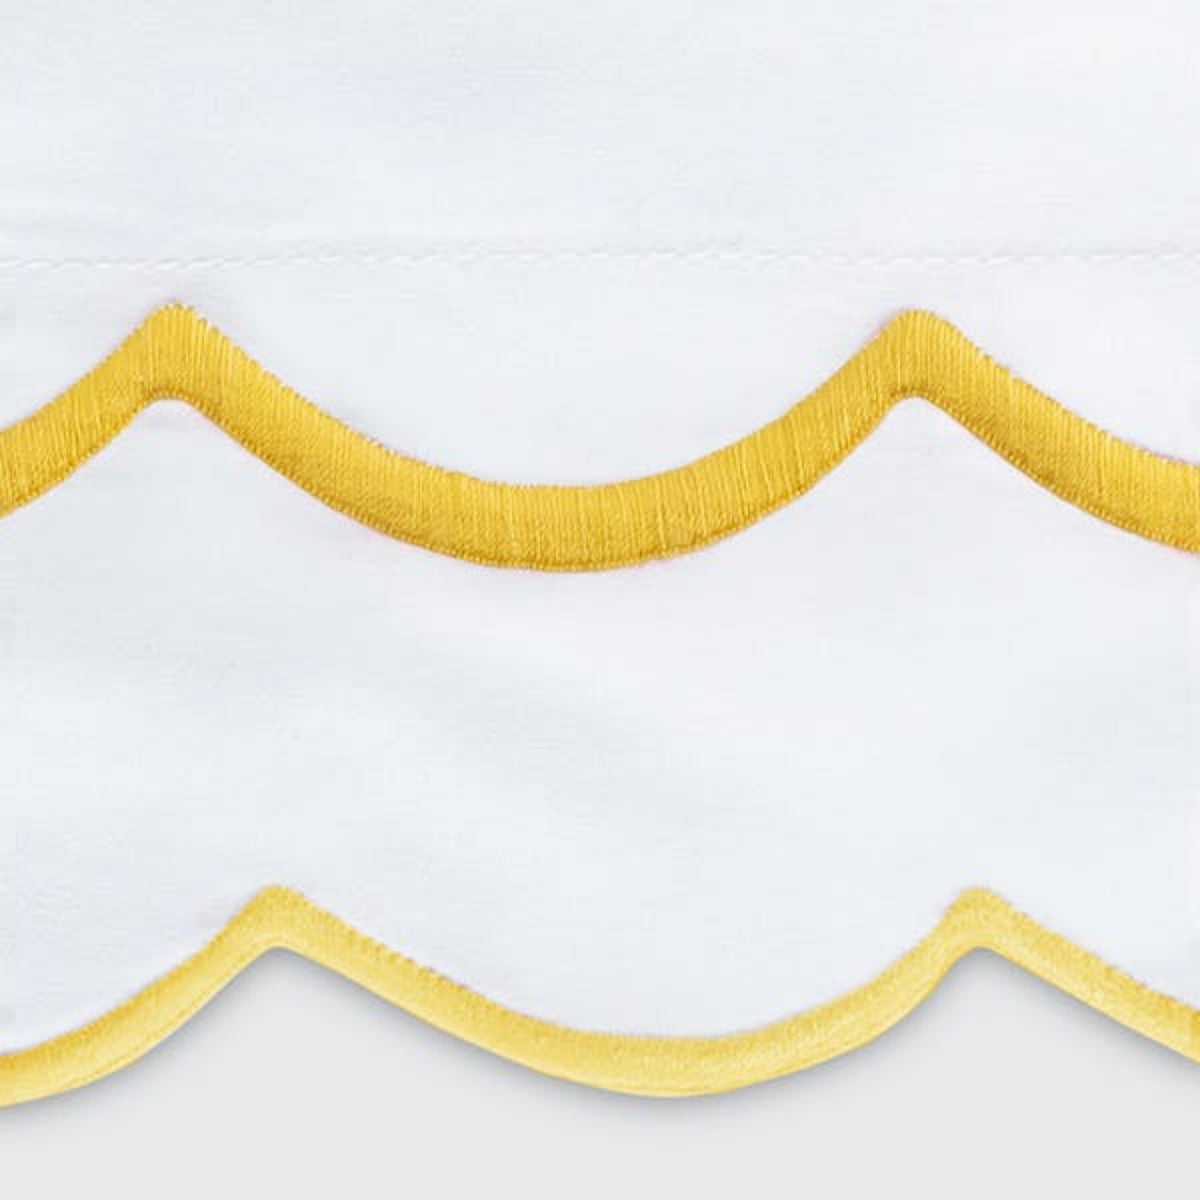 Swatch Sample of Matouk India Bedding in Lemon Color